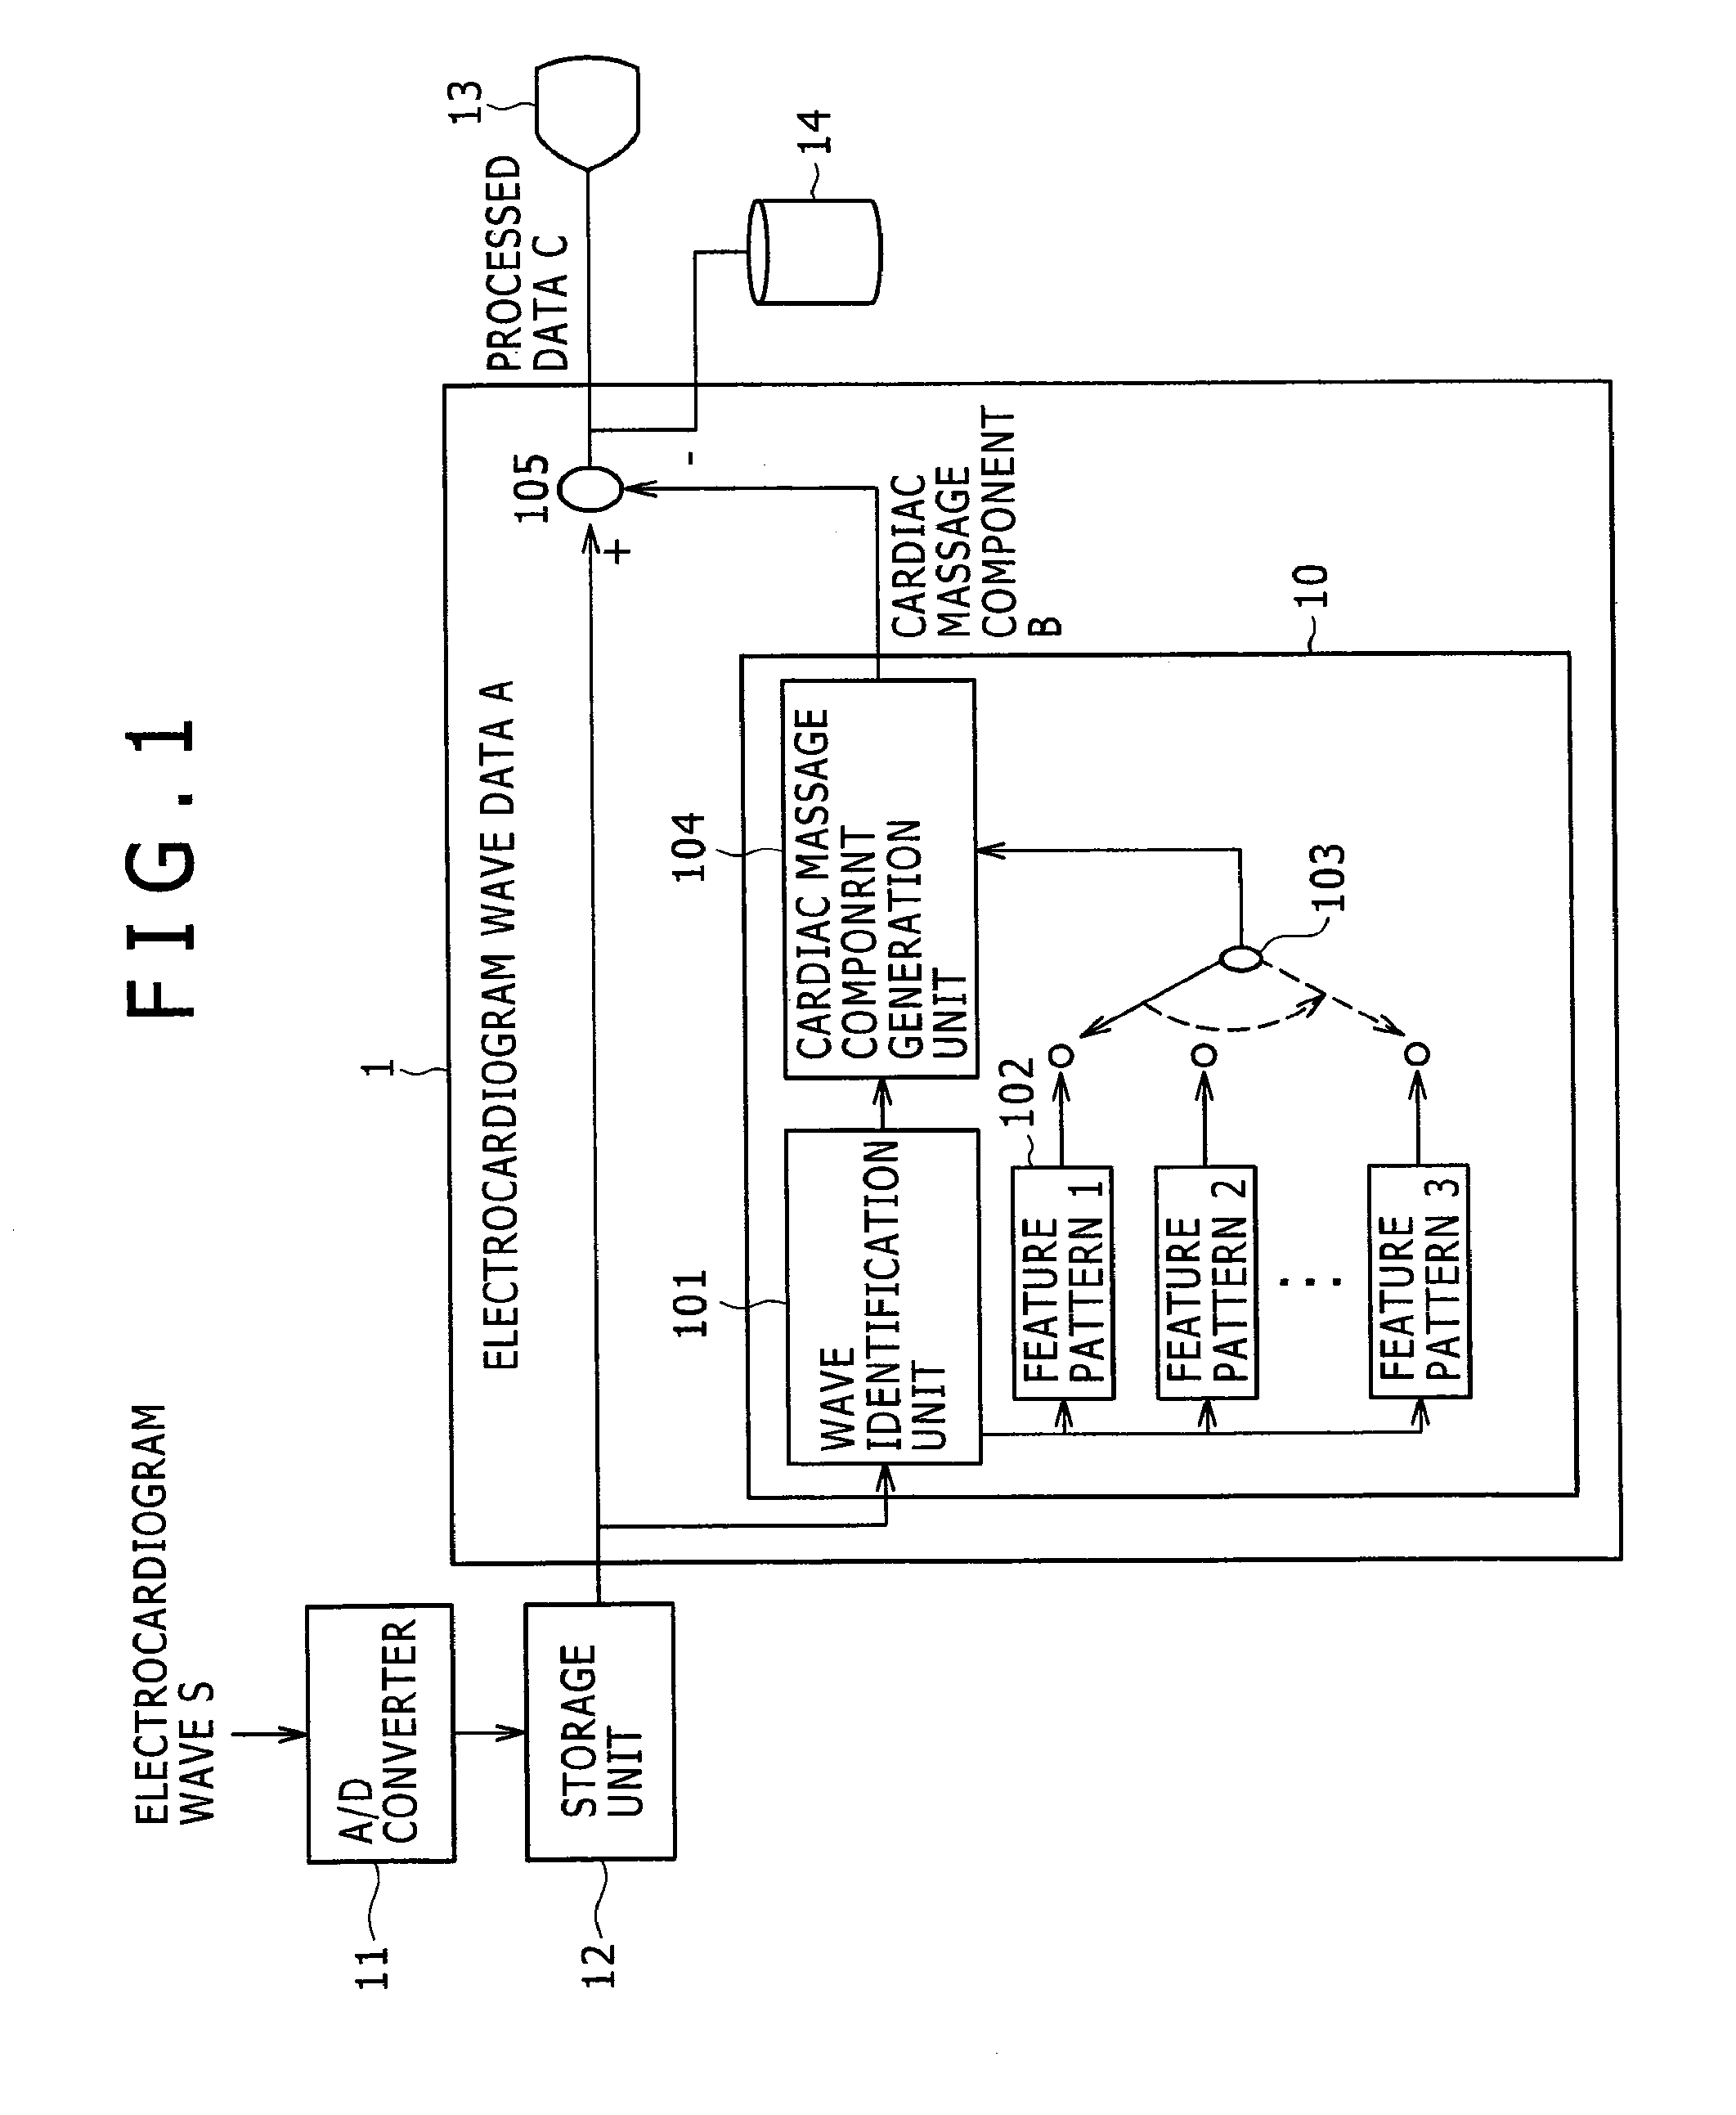 System and method for analyzing waves of electrocardiogram